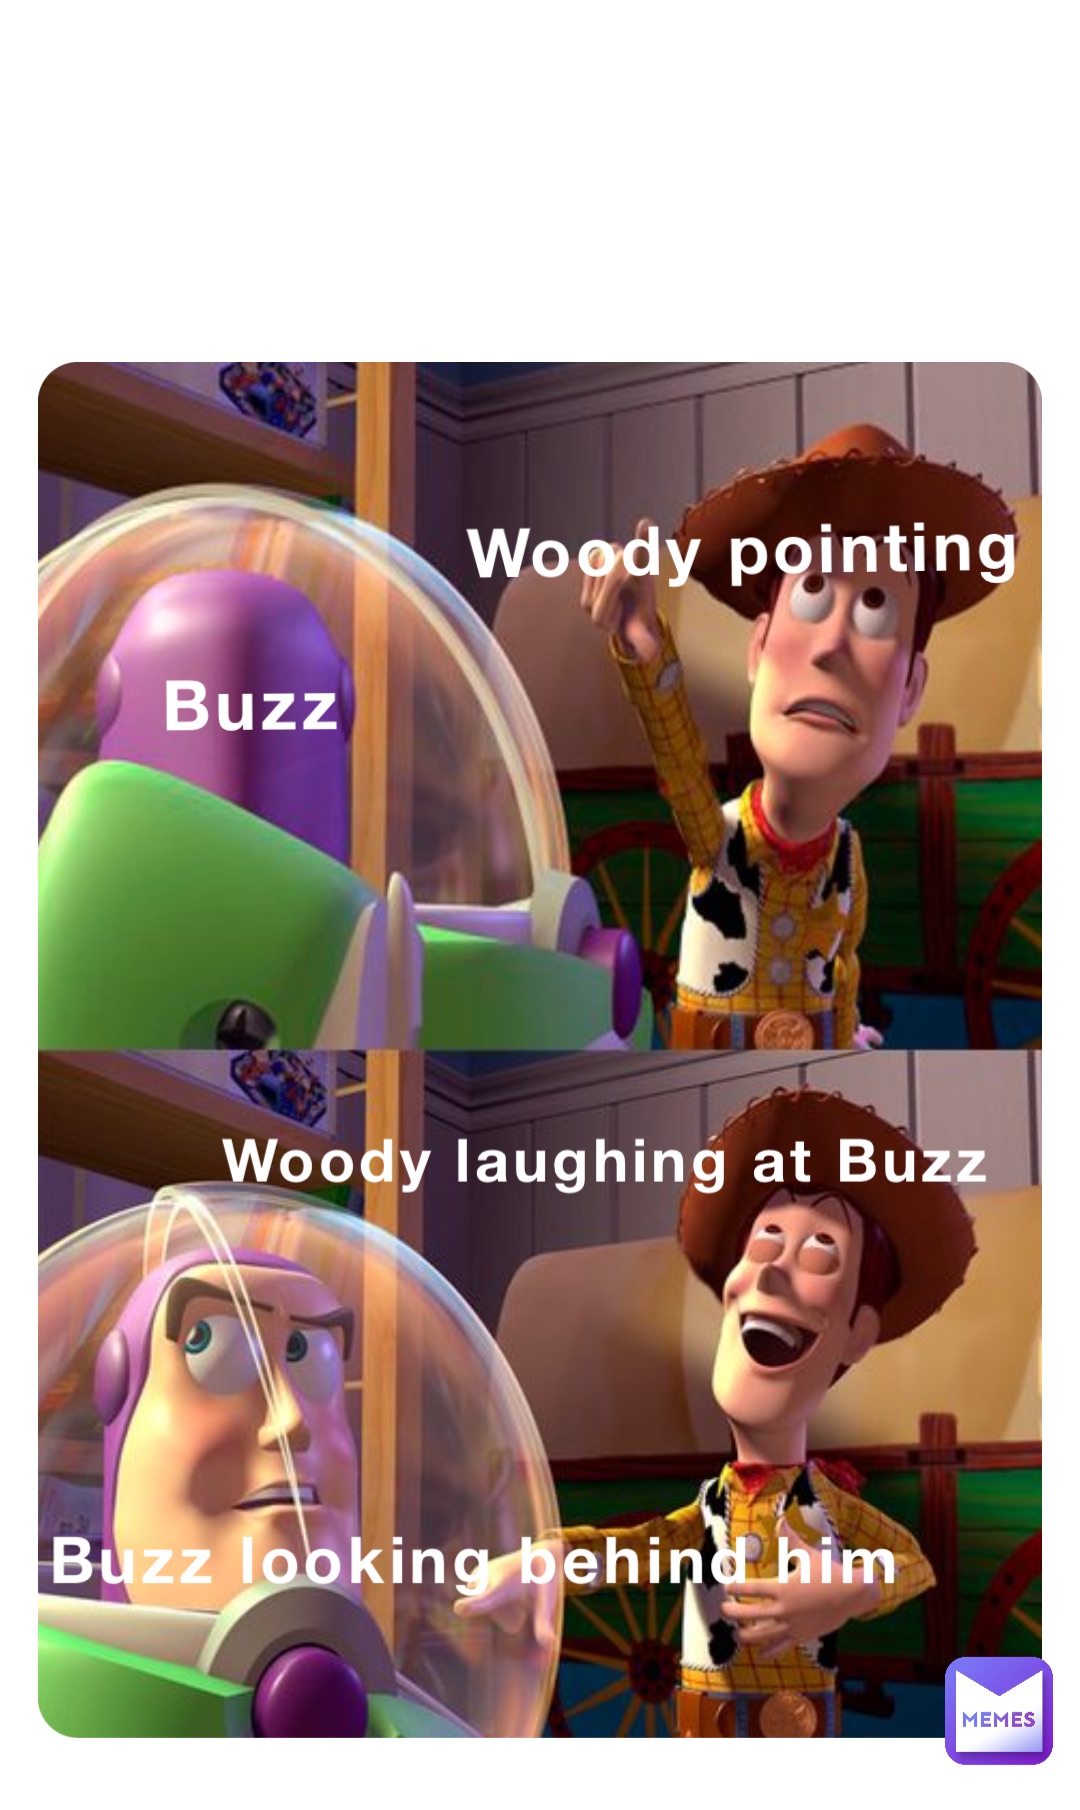 Double tap to edit Woody laughing at Buzz Buzz looking behind him Buzz Woody pointing